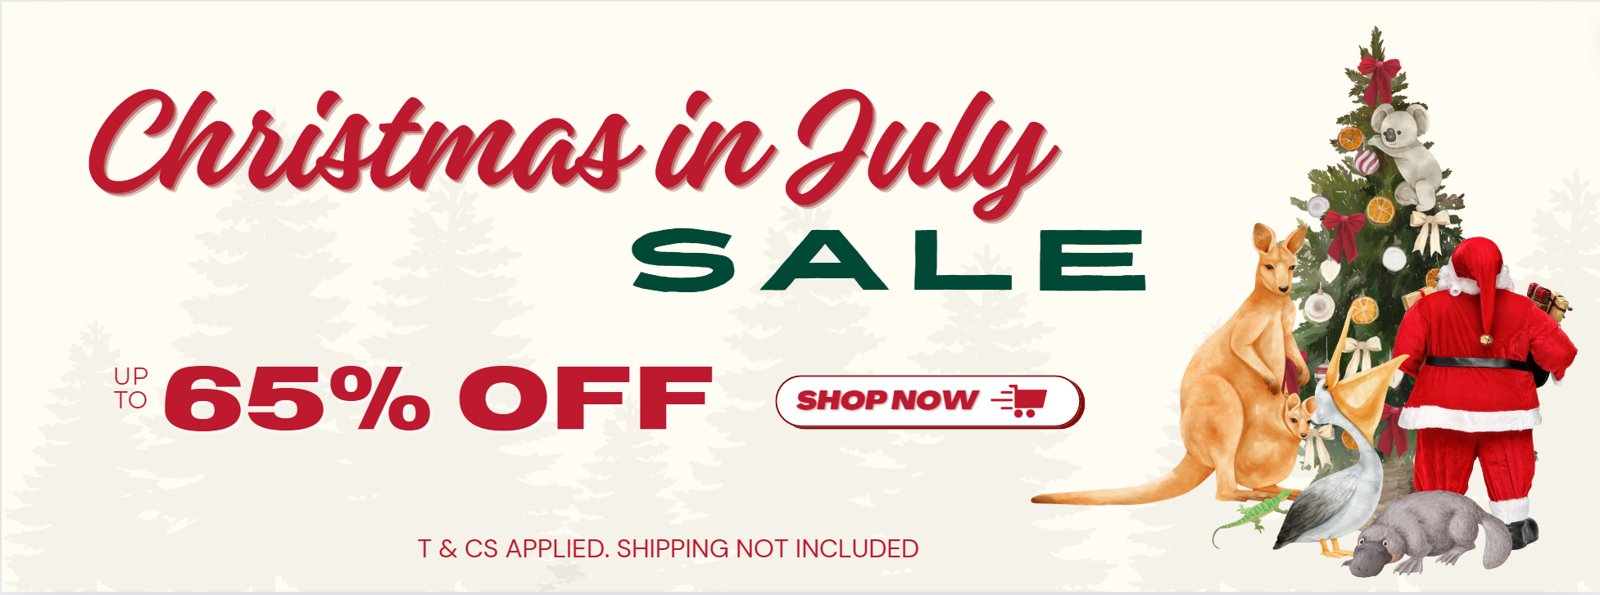 Christmas in July Sales up to 65% off Furniture Shed Carport Greenhouse Garage Storage System